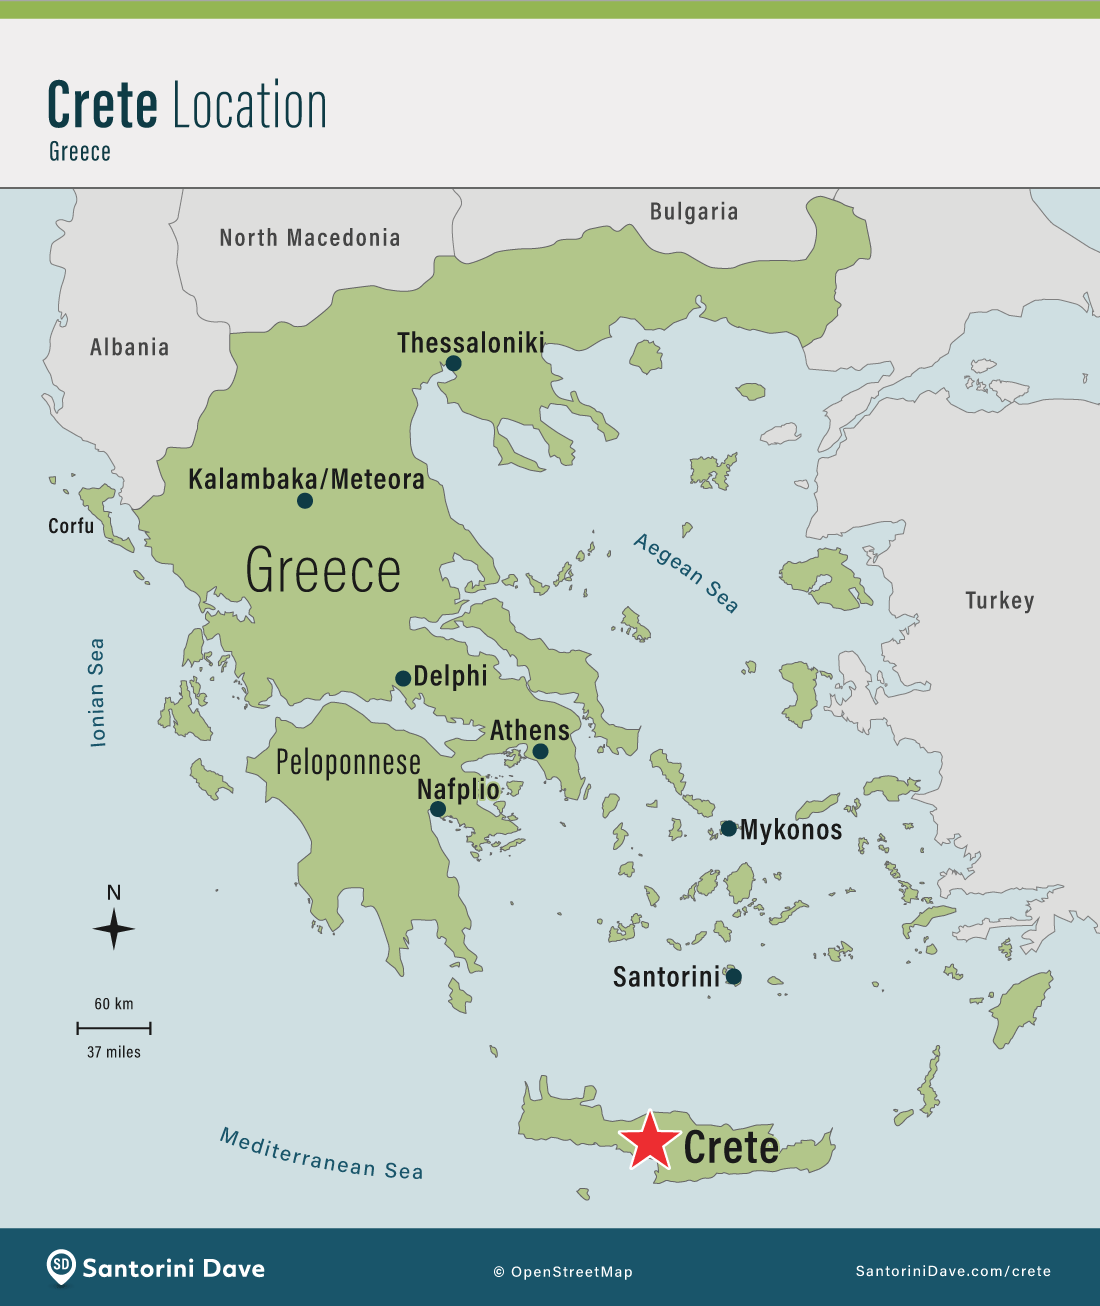 Map showing the location of the island of Crete within Europe.